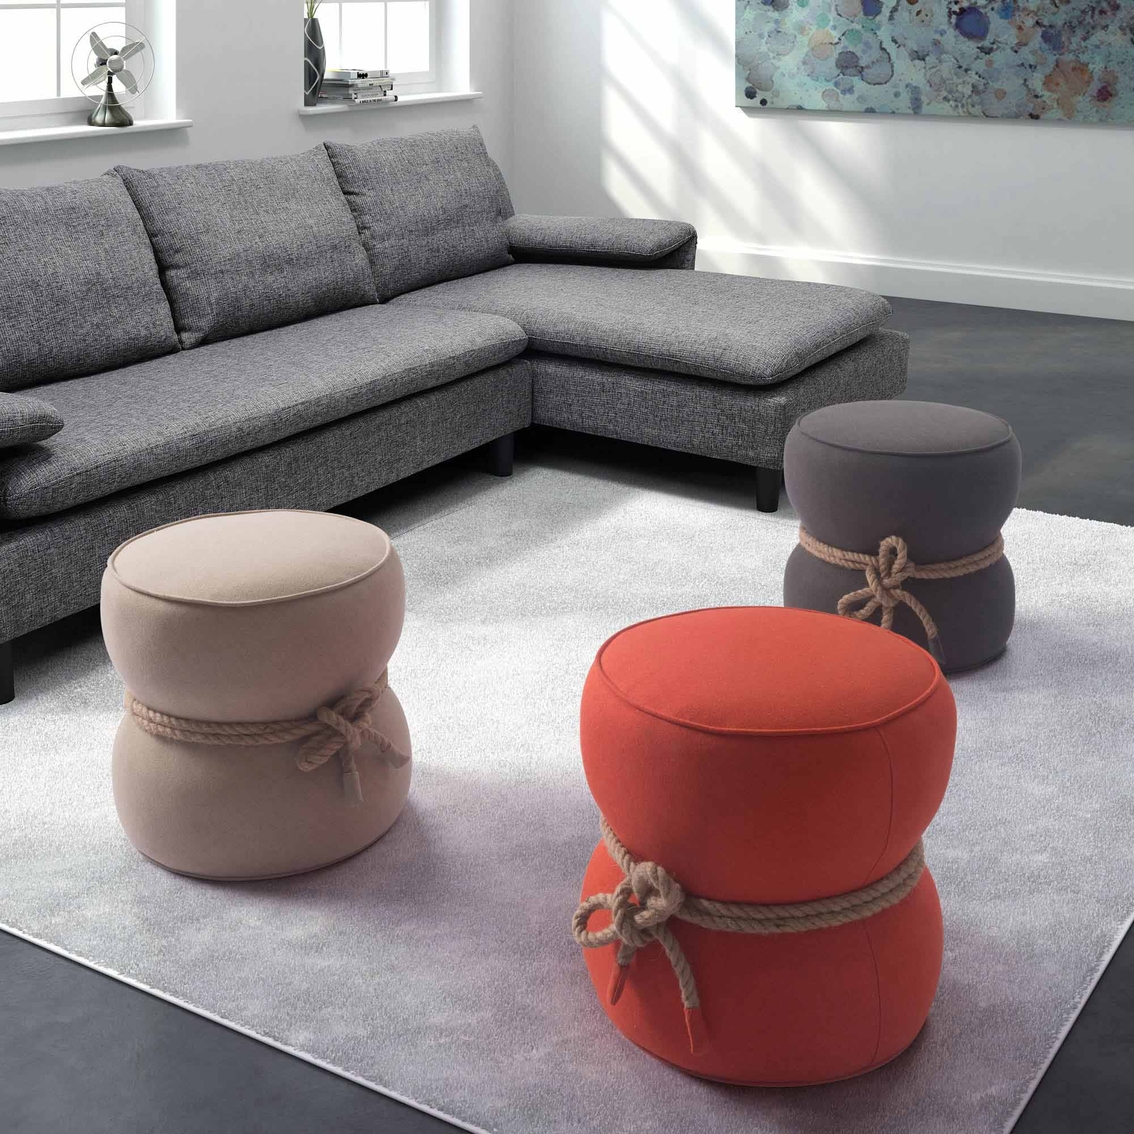 Zuo Tubby Beige Ottoman - Image 3 of 3